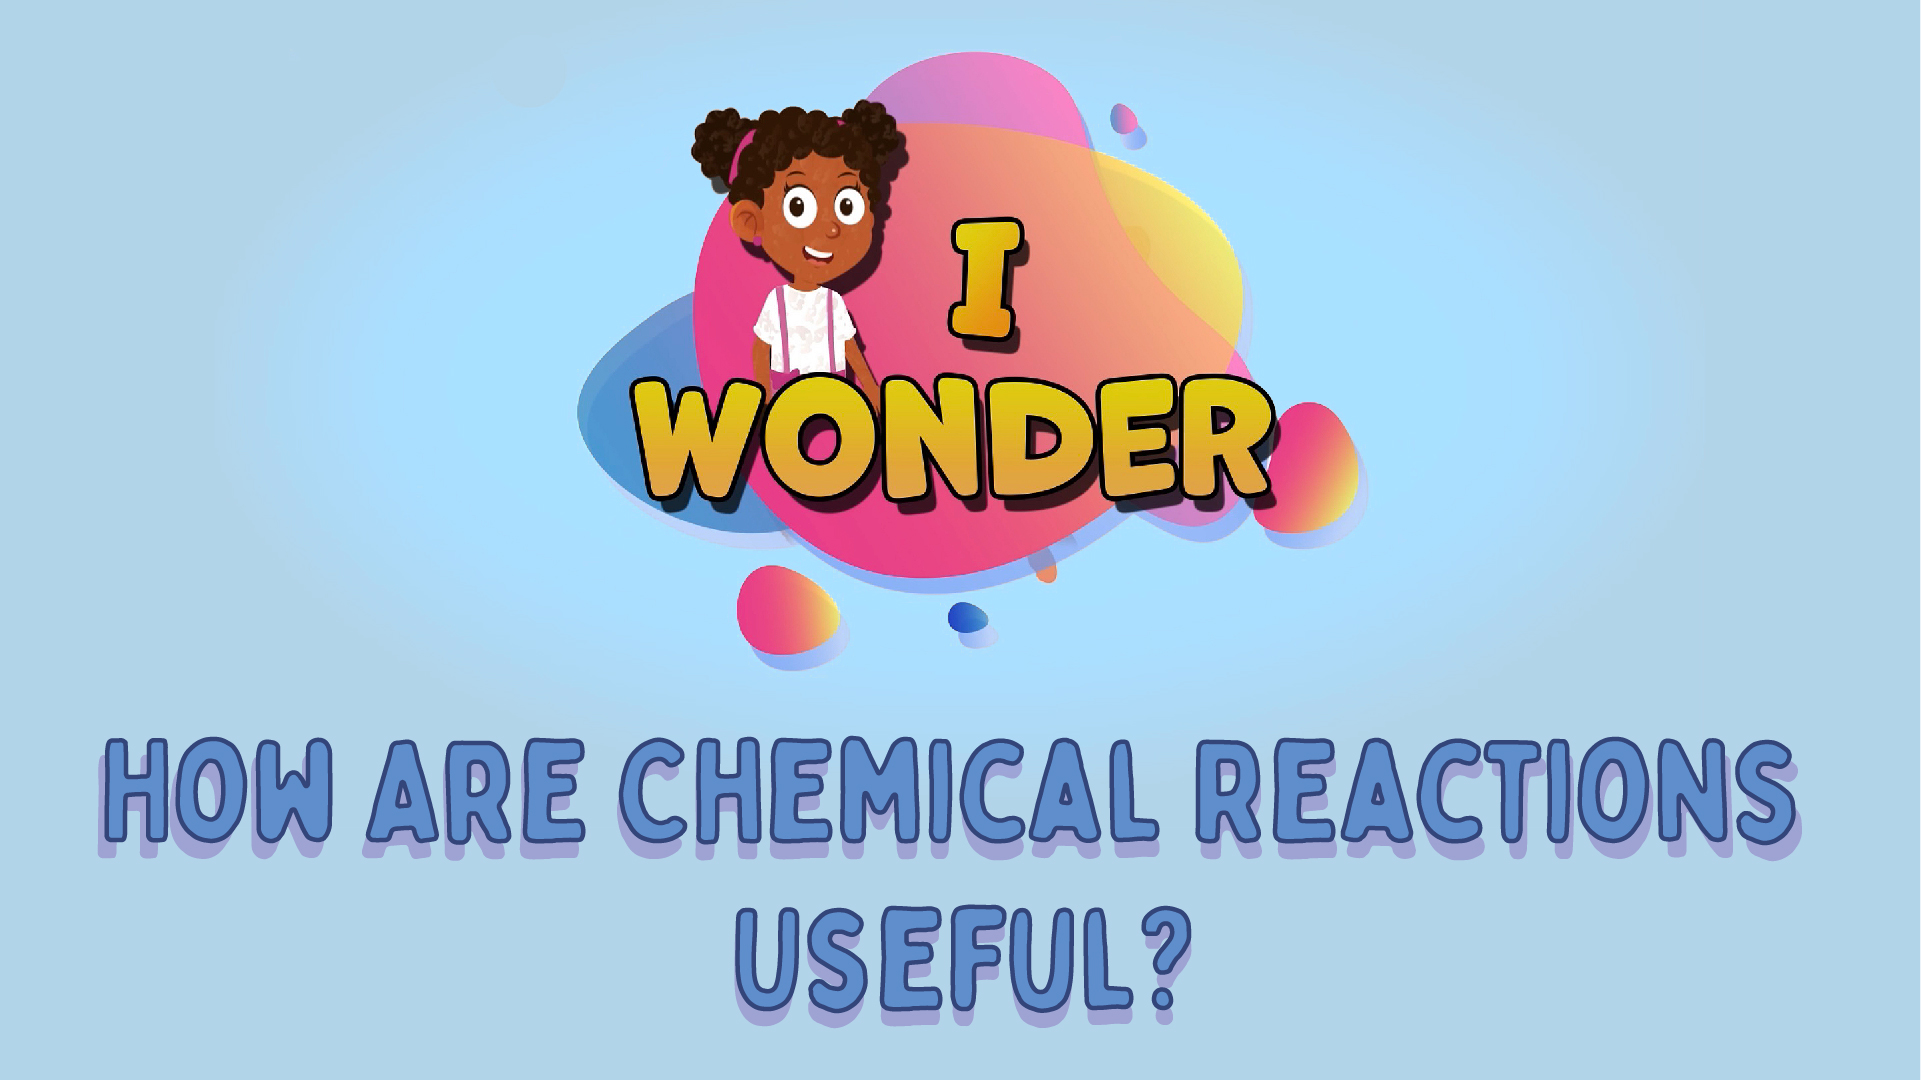 How Are Chemical Reactions Useful?